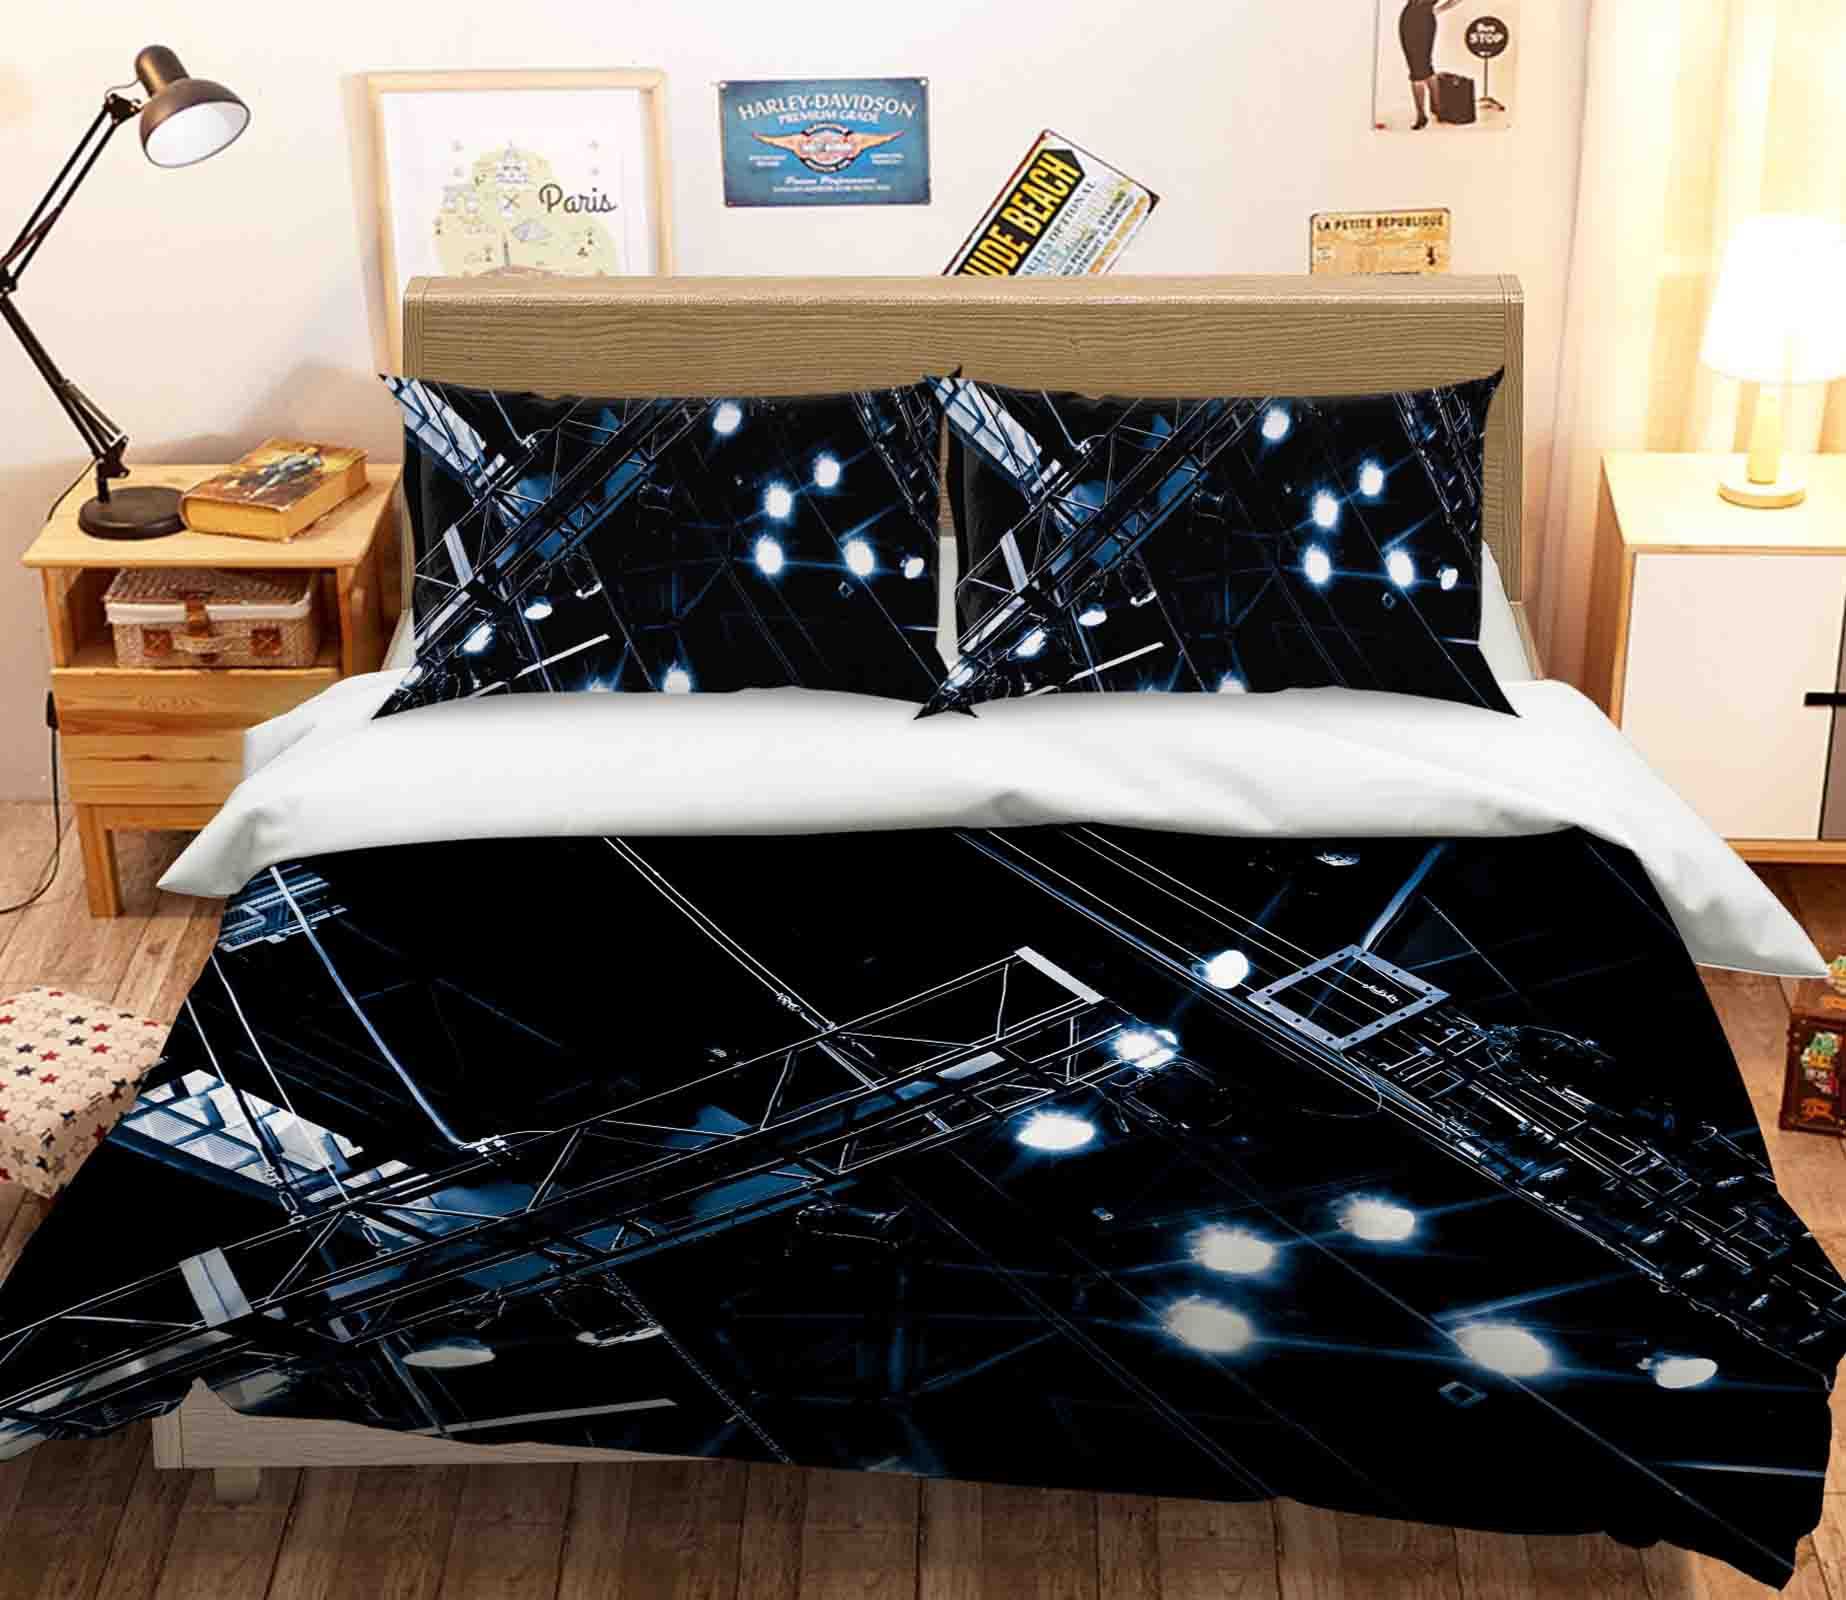 3D Bright Light 2003 Noirblanc777 Bedding Bed Pillowcases Quilt Quiet Covers AJ Creativity Home 